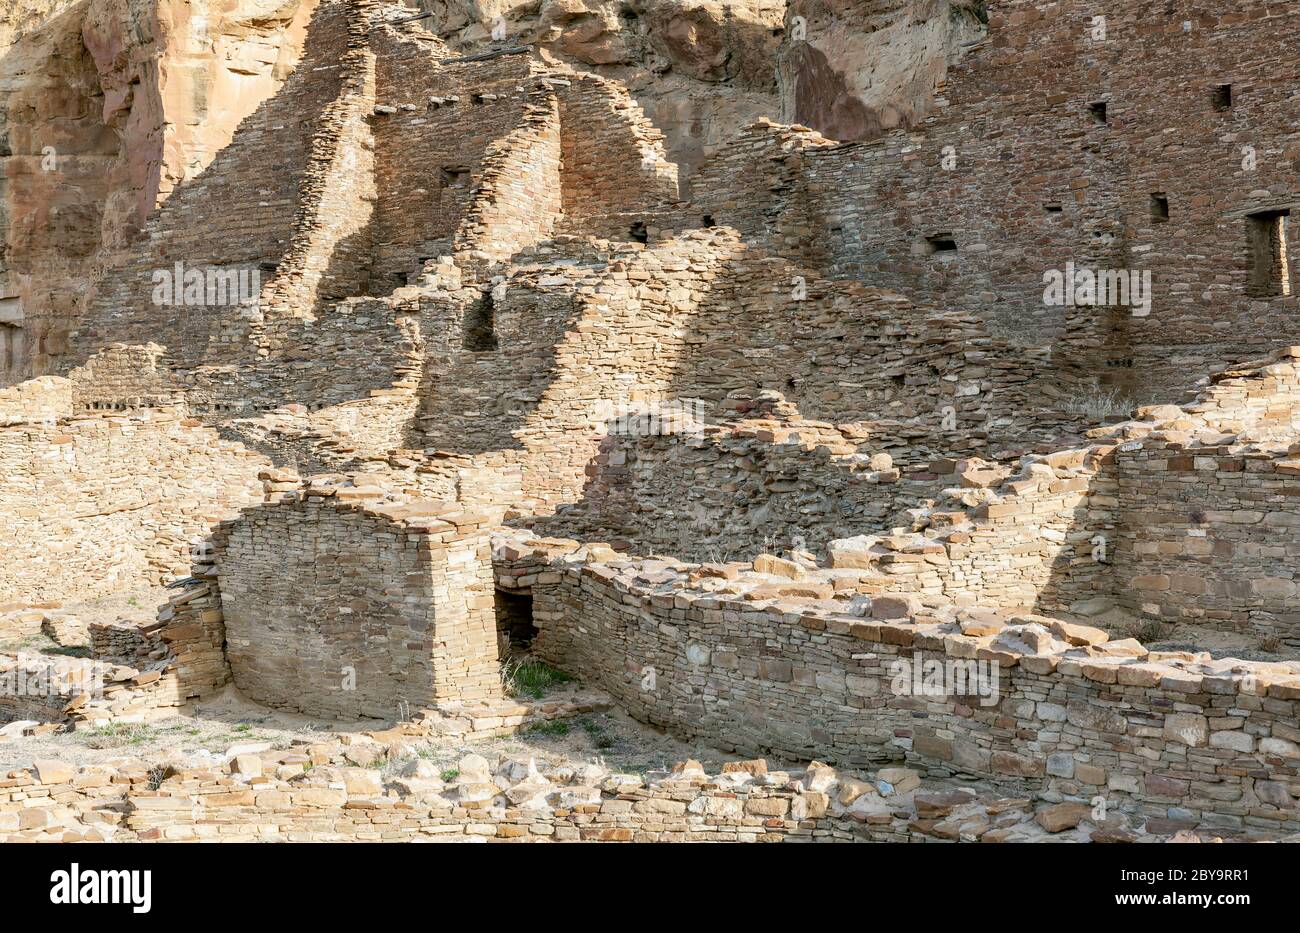 NM00586-00...NEW MEXICO - Masonry stone walls of Kin Kletso built by the early Chaco People.  Chaco Culture National Historic Park. Stock Photo